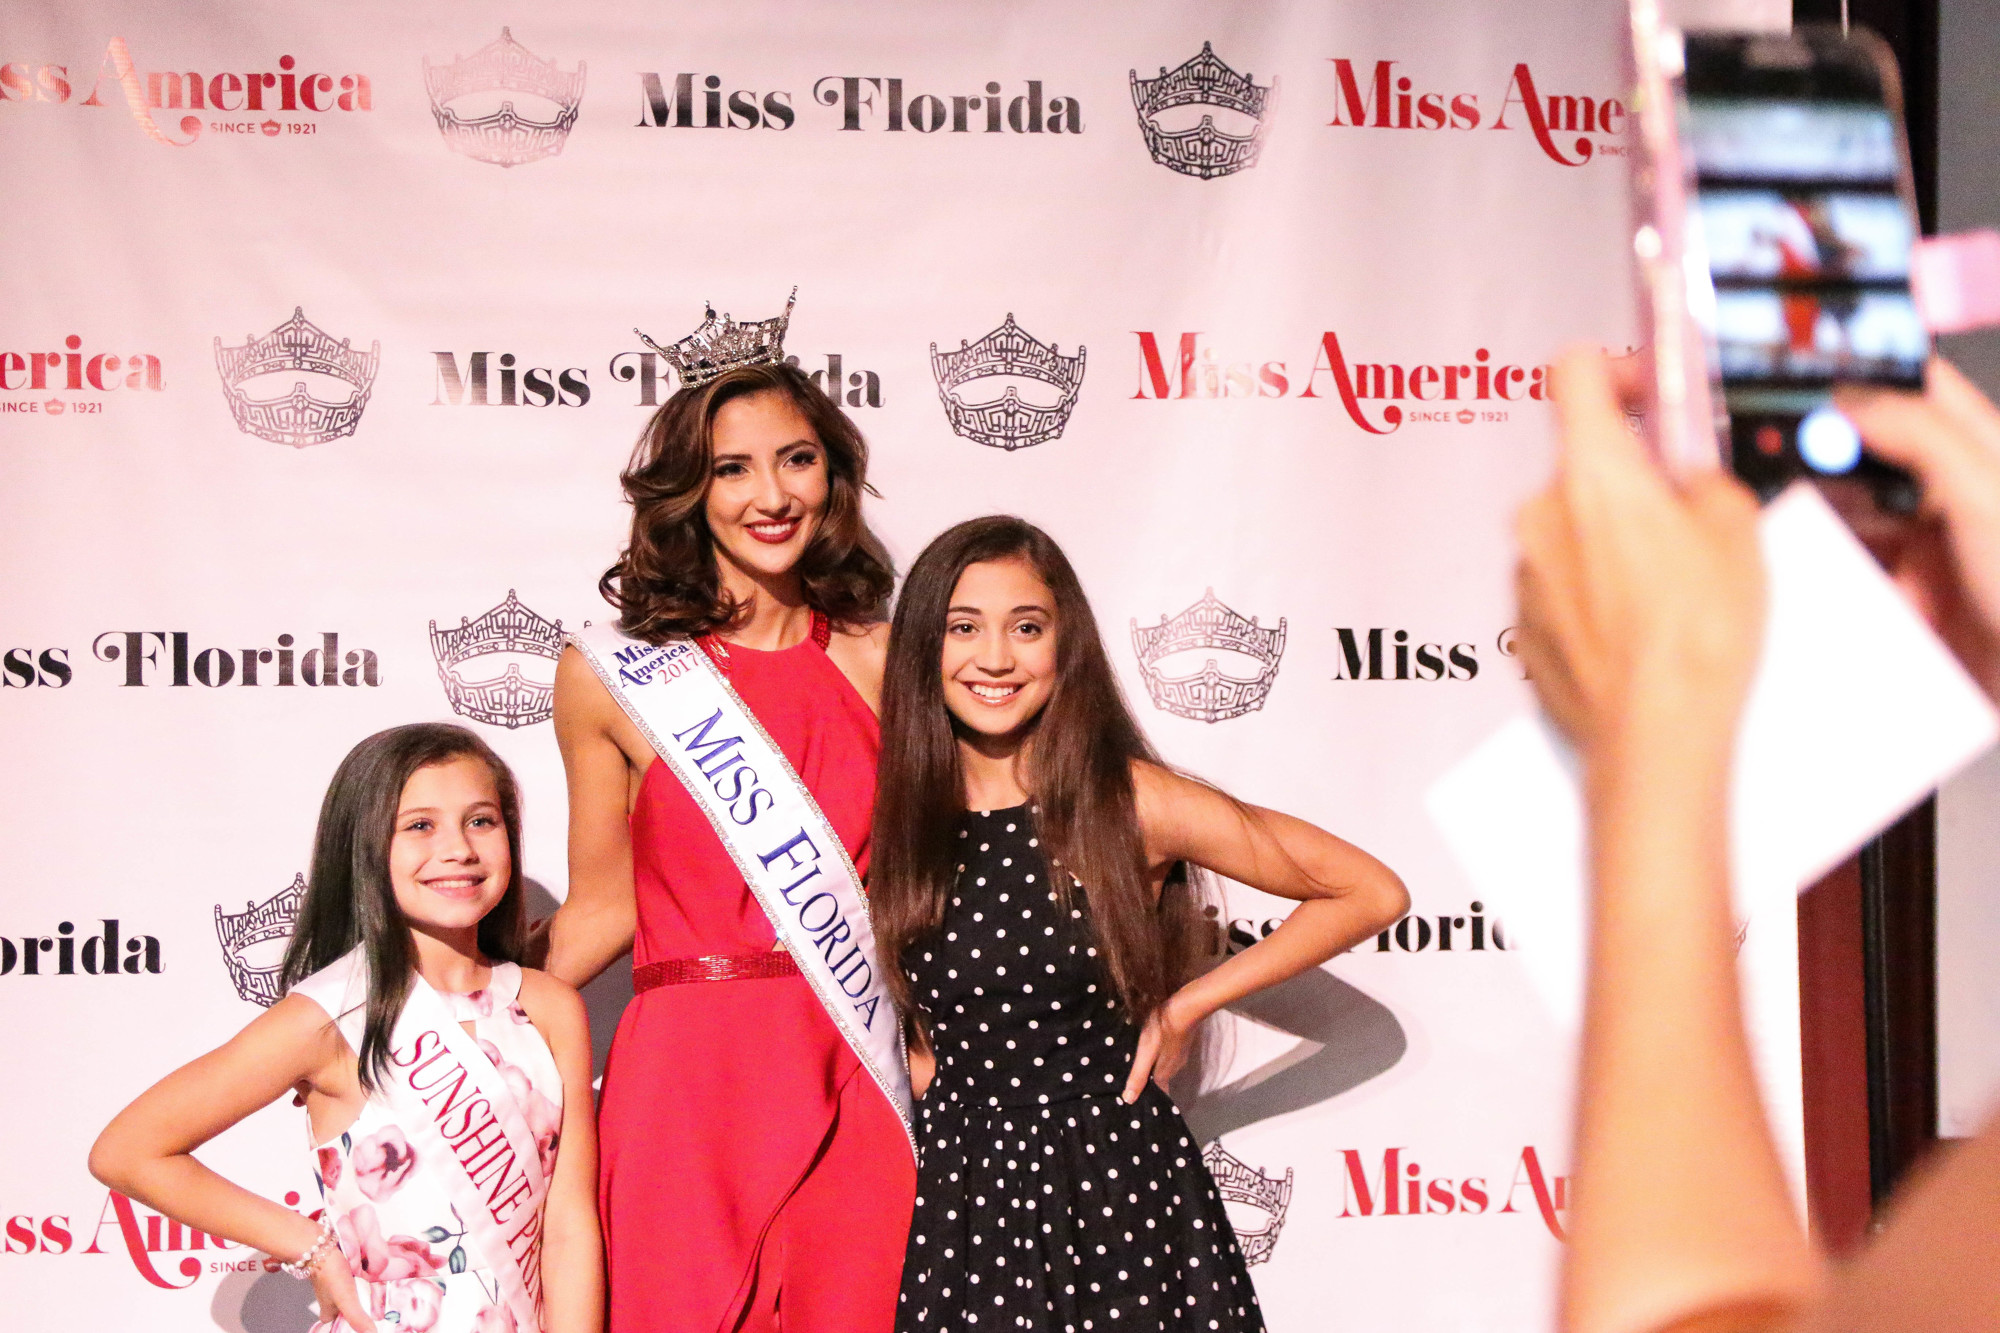 Ashlyn Palacios (left) and Alexis Palacios (right) take a photo with Miss Florida, Sara Zeng. Photo by Paige Wilson